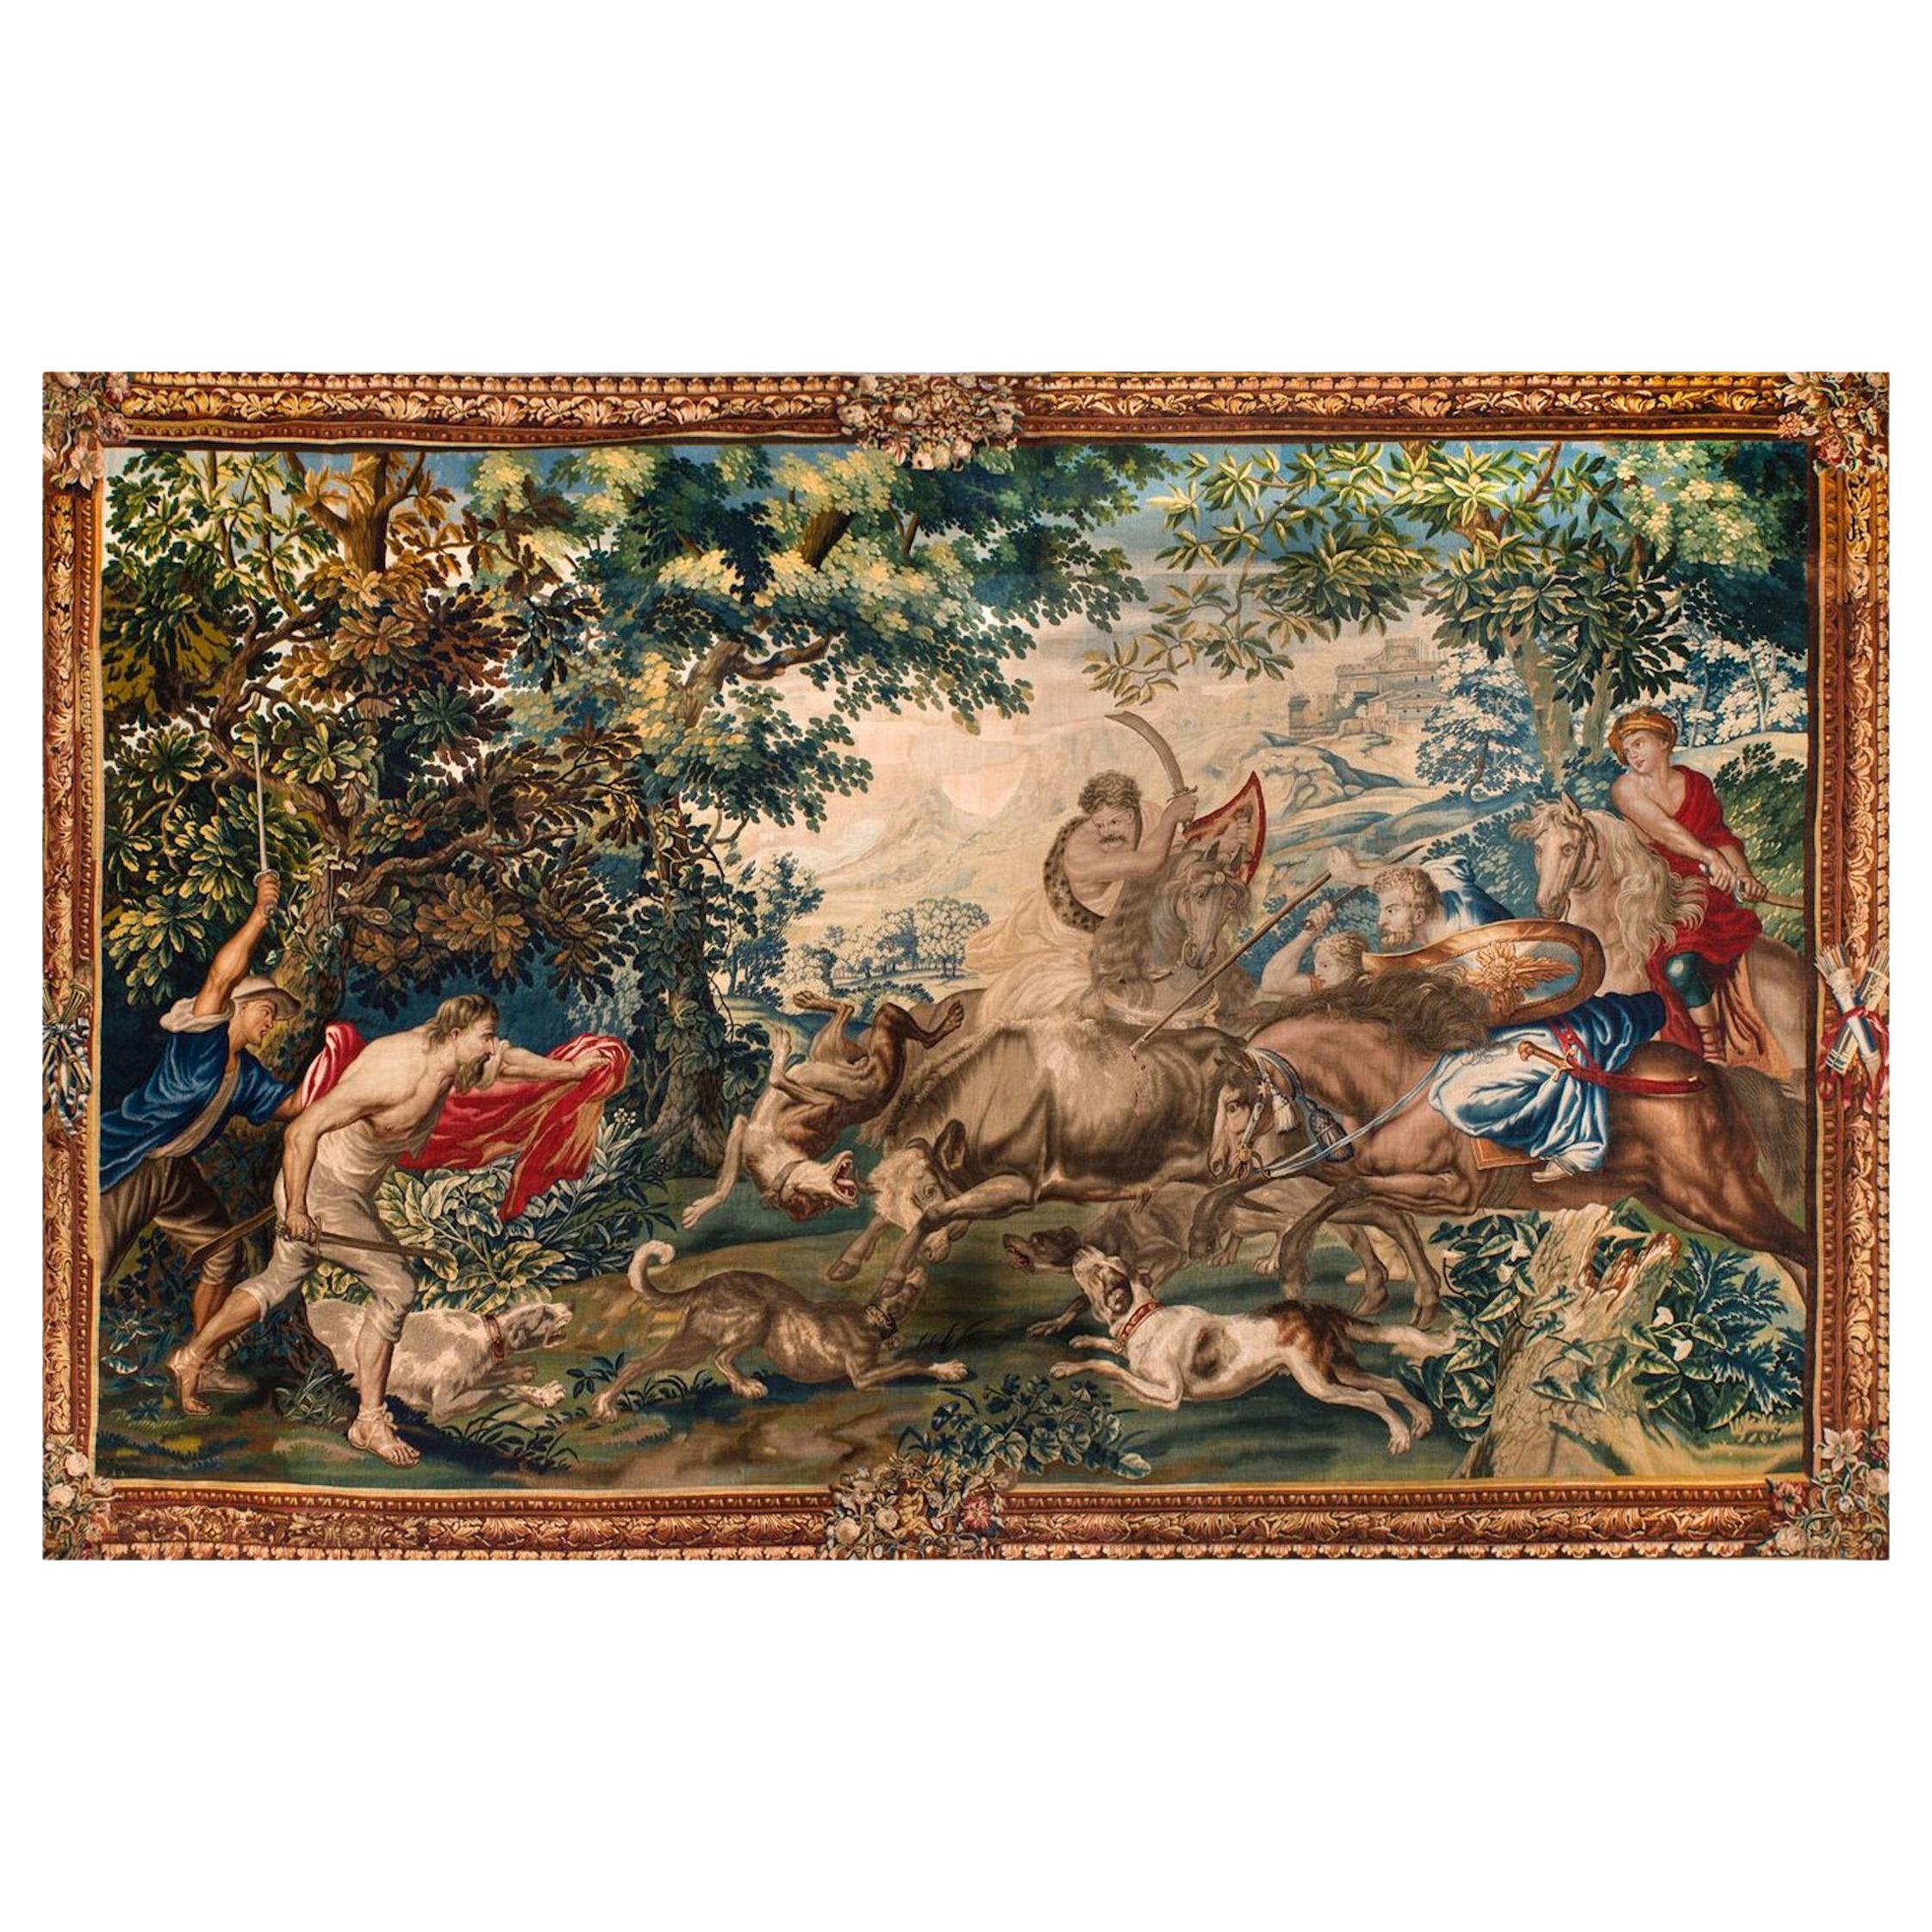 Outstanding Flemish Historical Tapestry The Bull Hunting, 17th Century